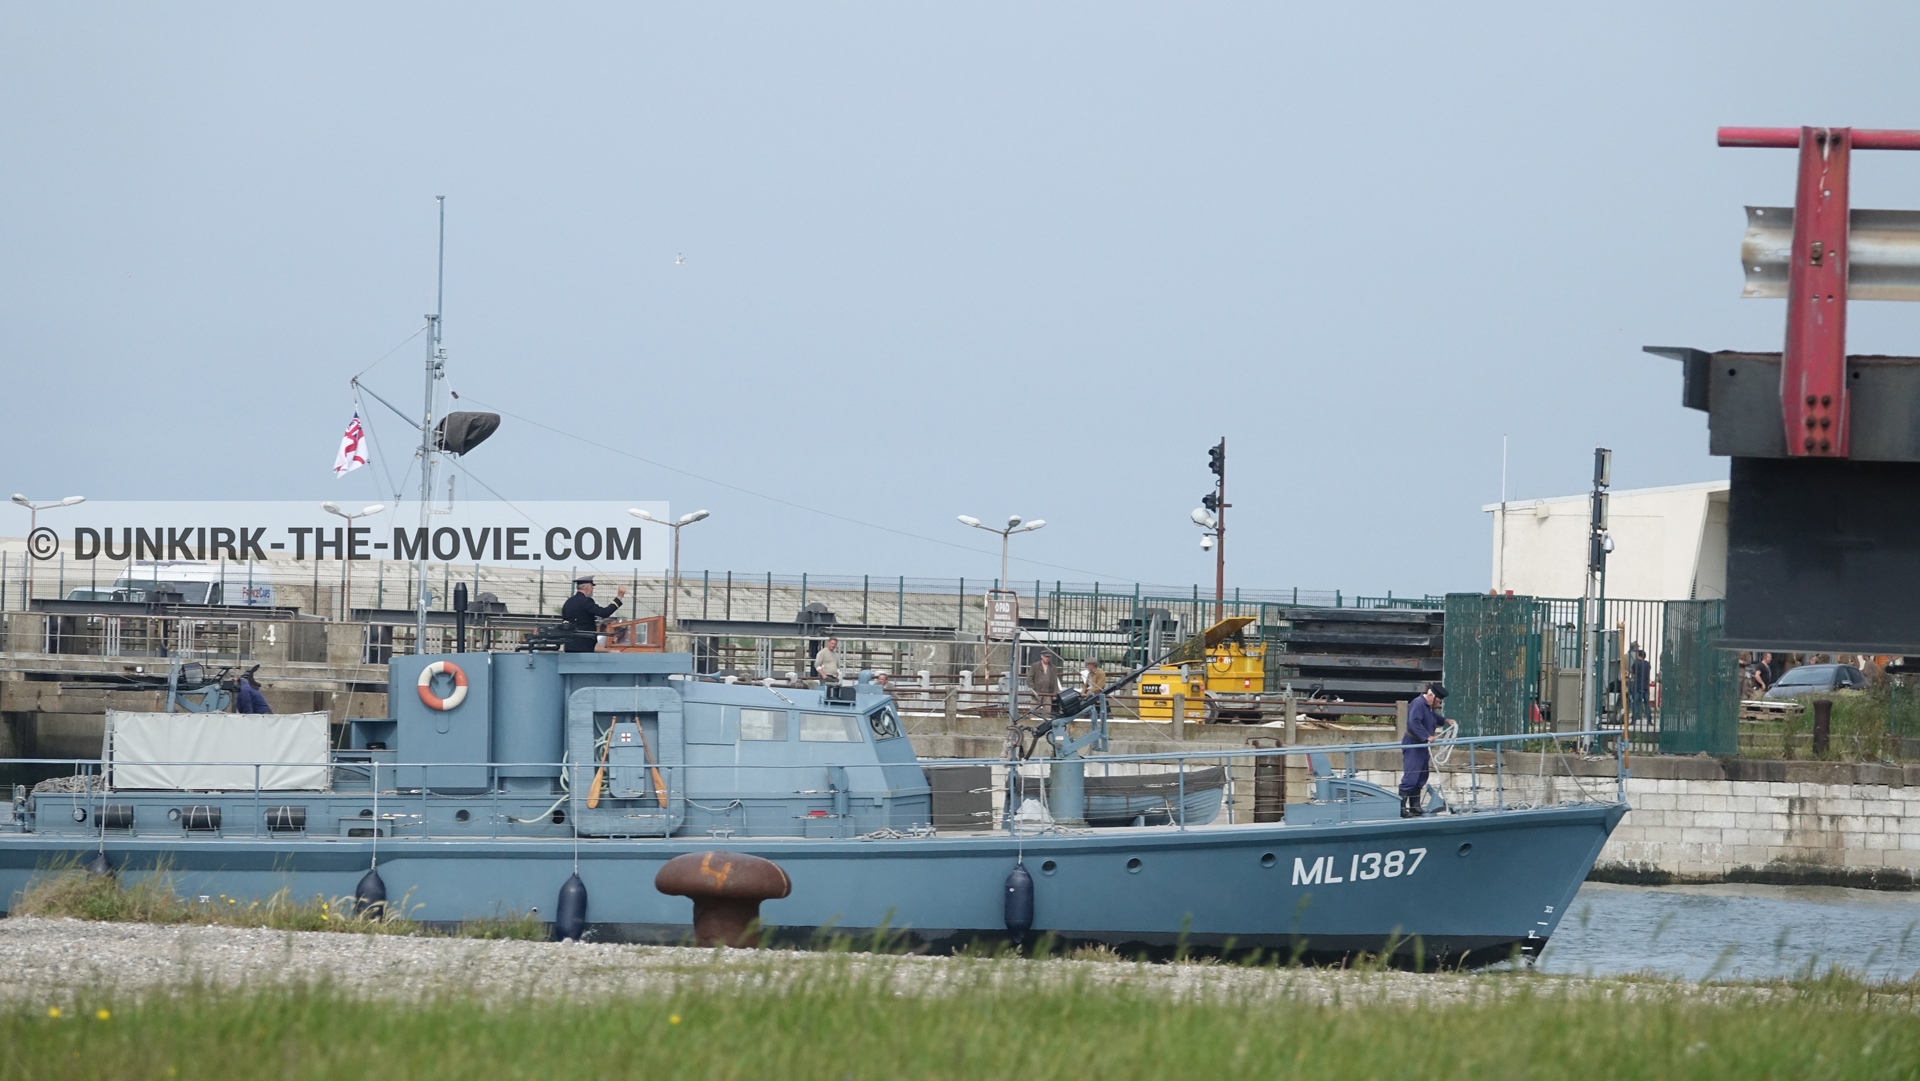 Picture with HMS Medusa - ML1387, EST pier,  from behind the scene of the Dunkirk movie by Nolan